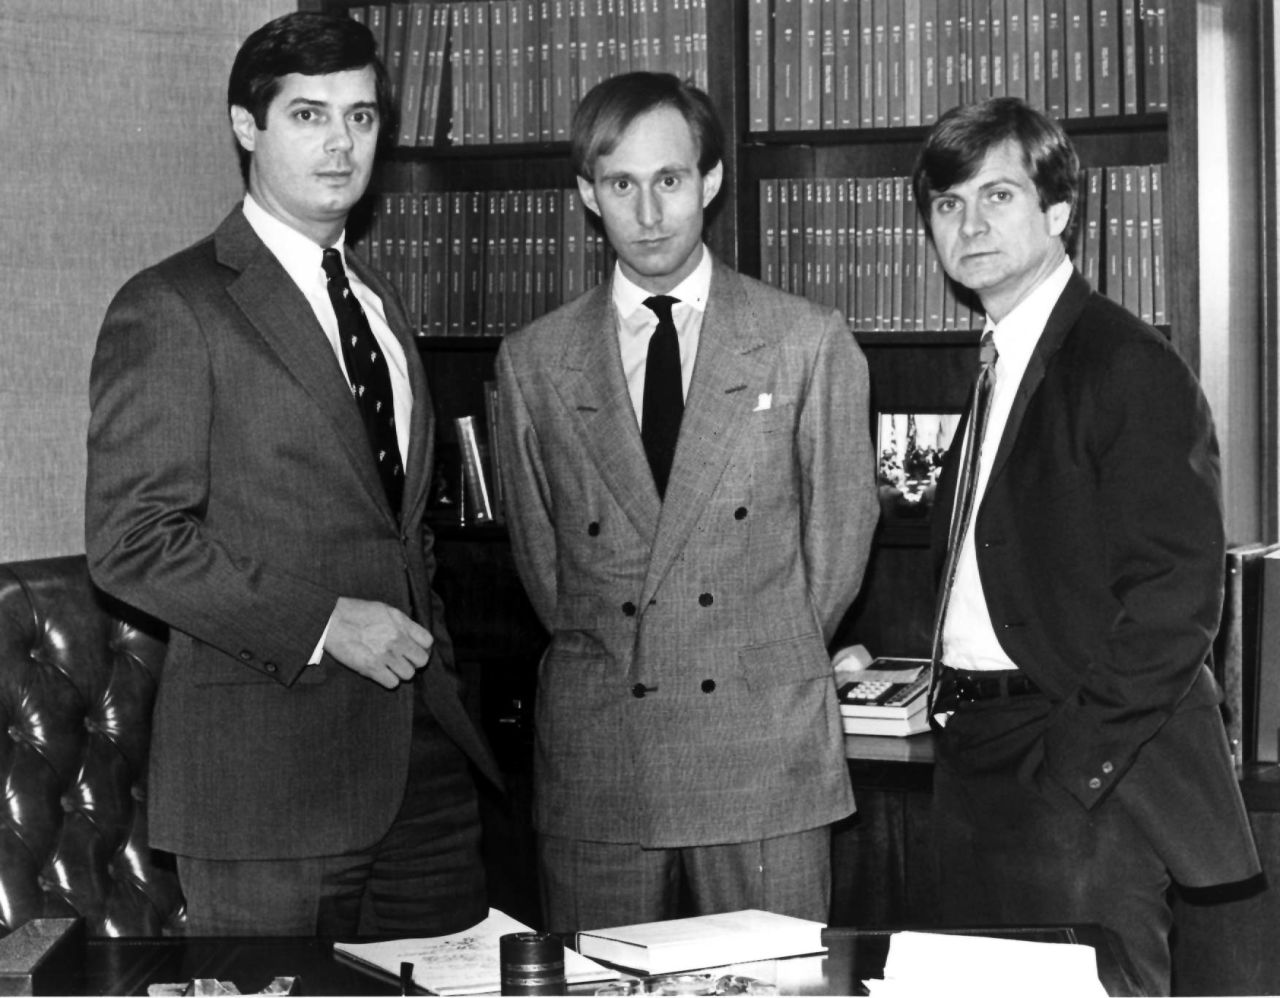 Stone, center, is pictured with Paul Manafort, left, and Atwater in March 1985.